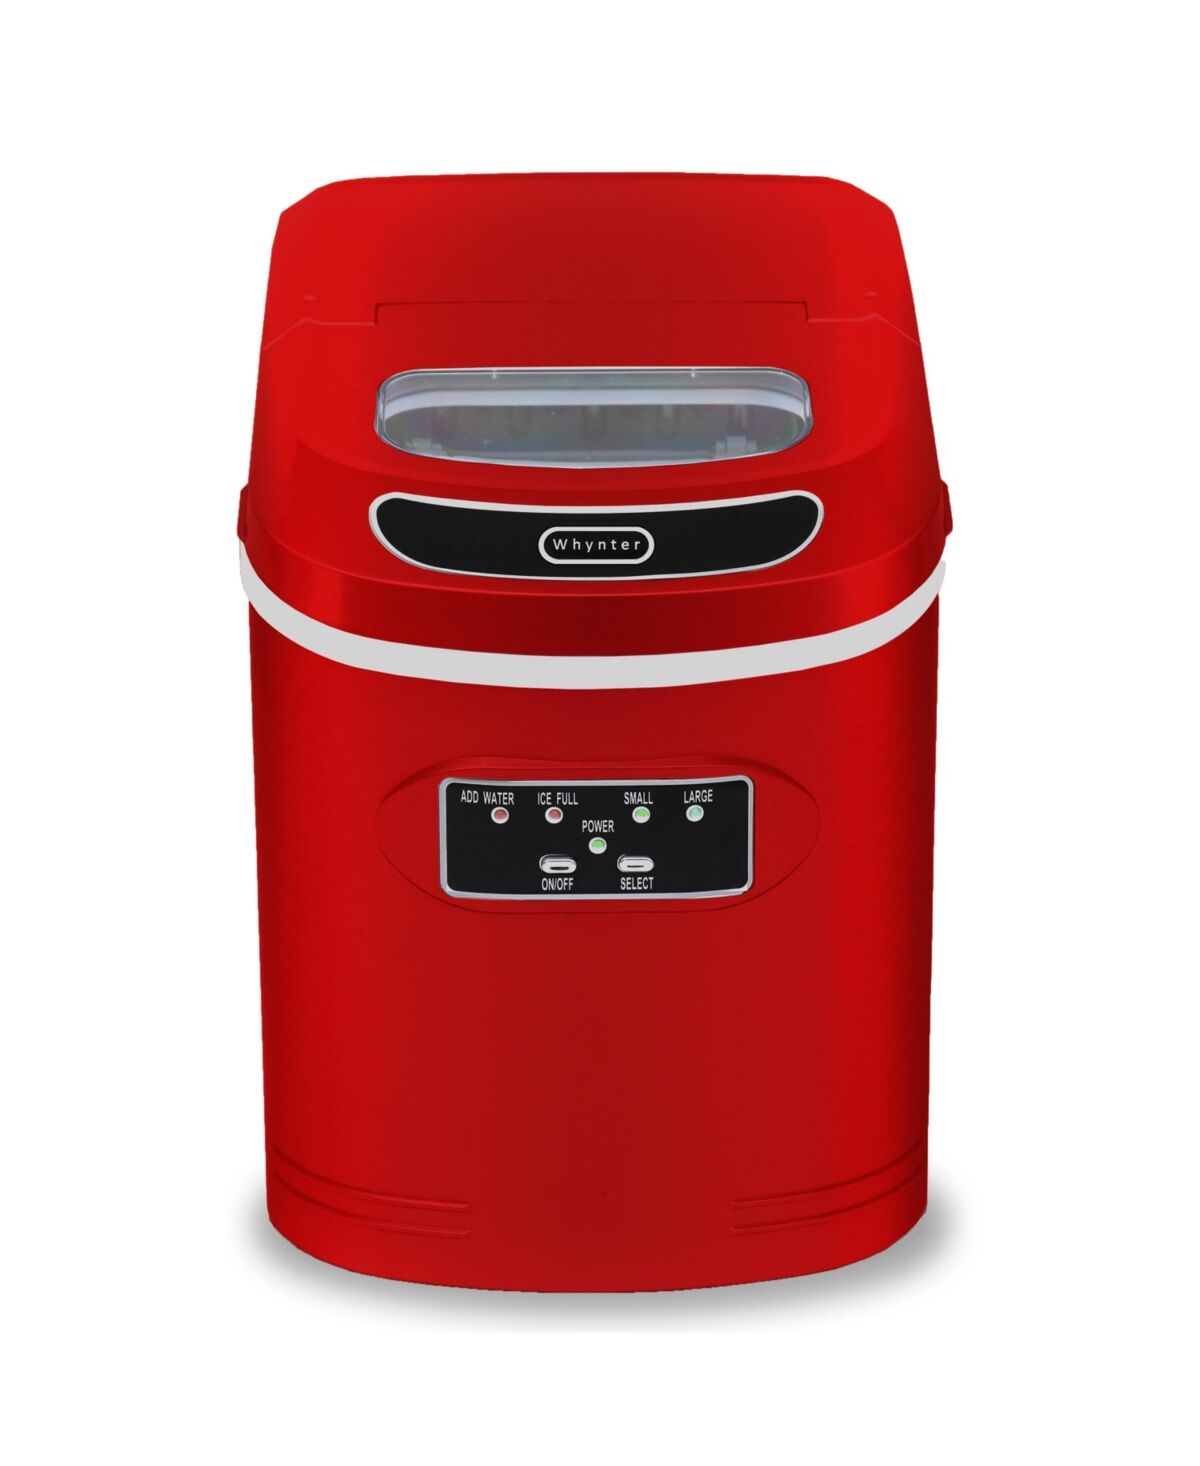 Whynter Compact Portable Ice Maker 27 lb capacity - Red - Red